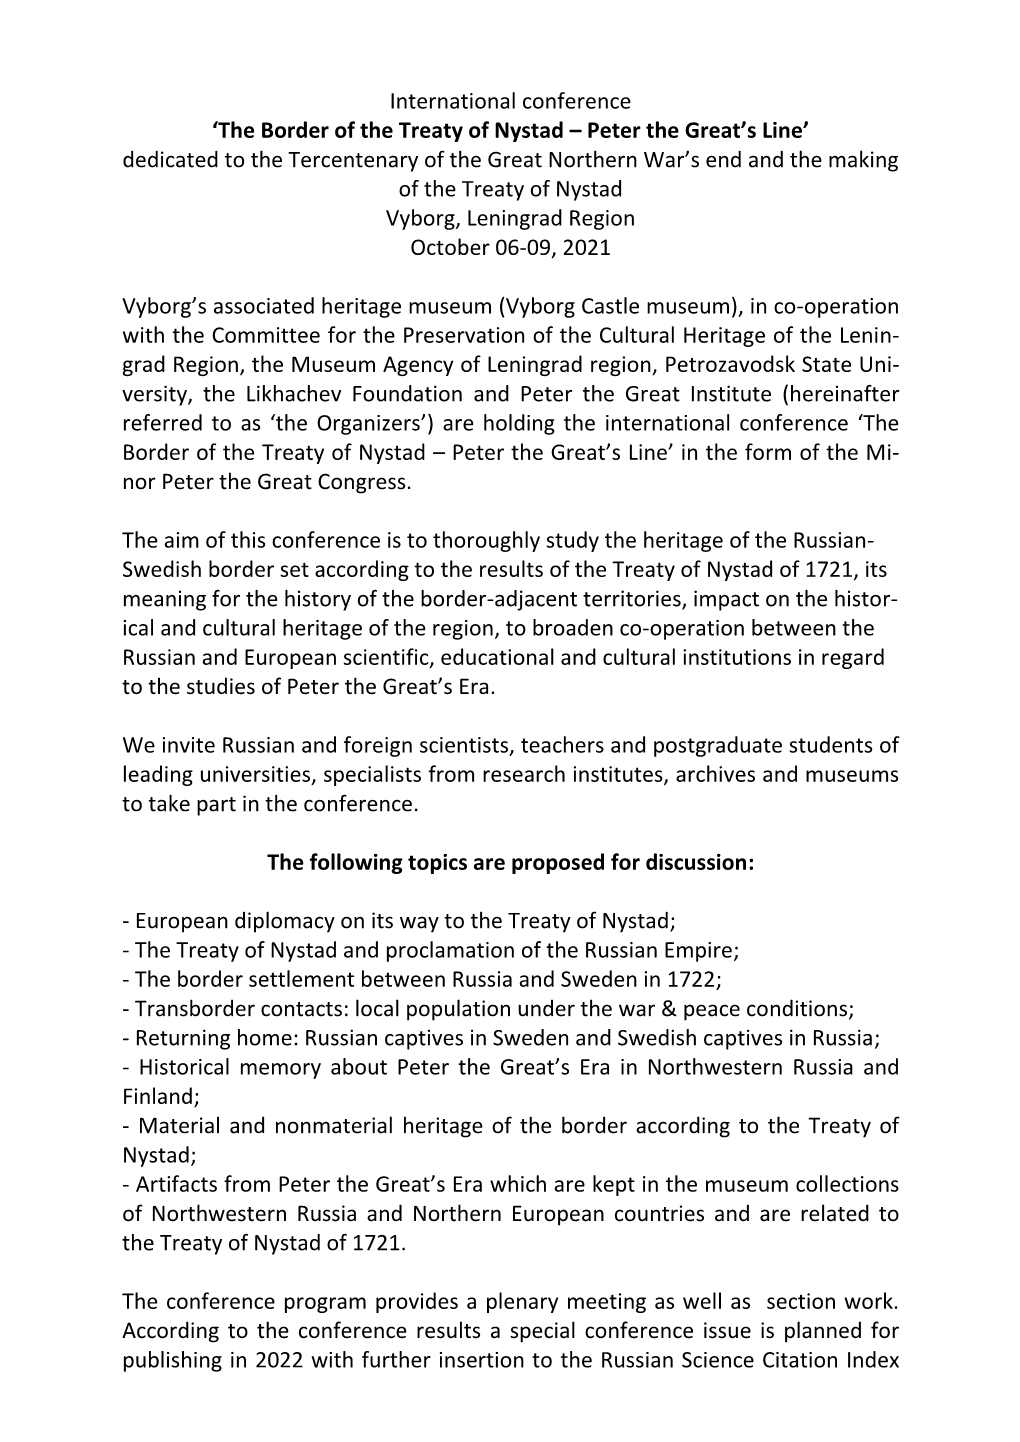 International Conference 'The Border of the Treaty of Nystad – Peter The